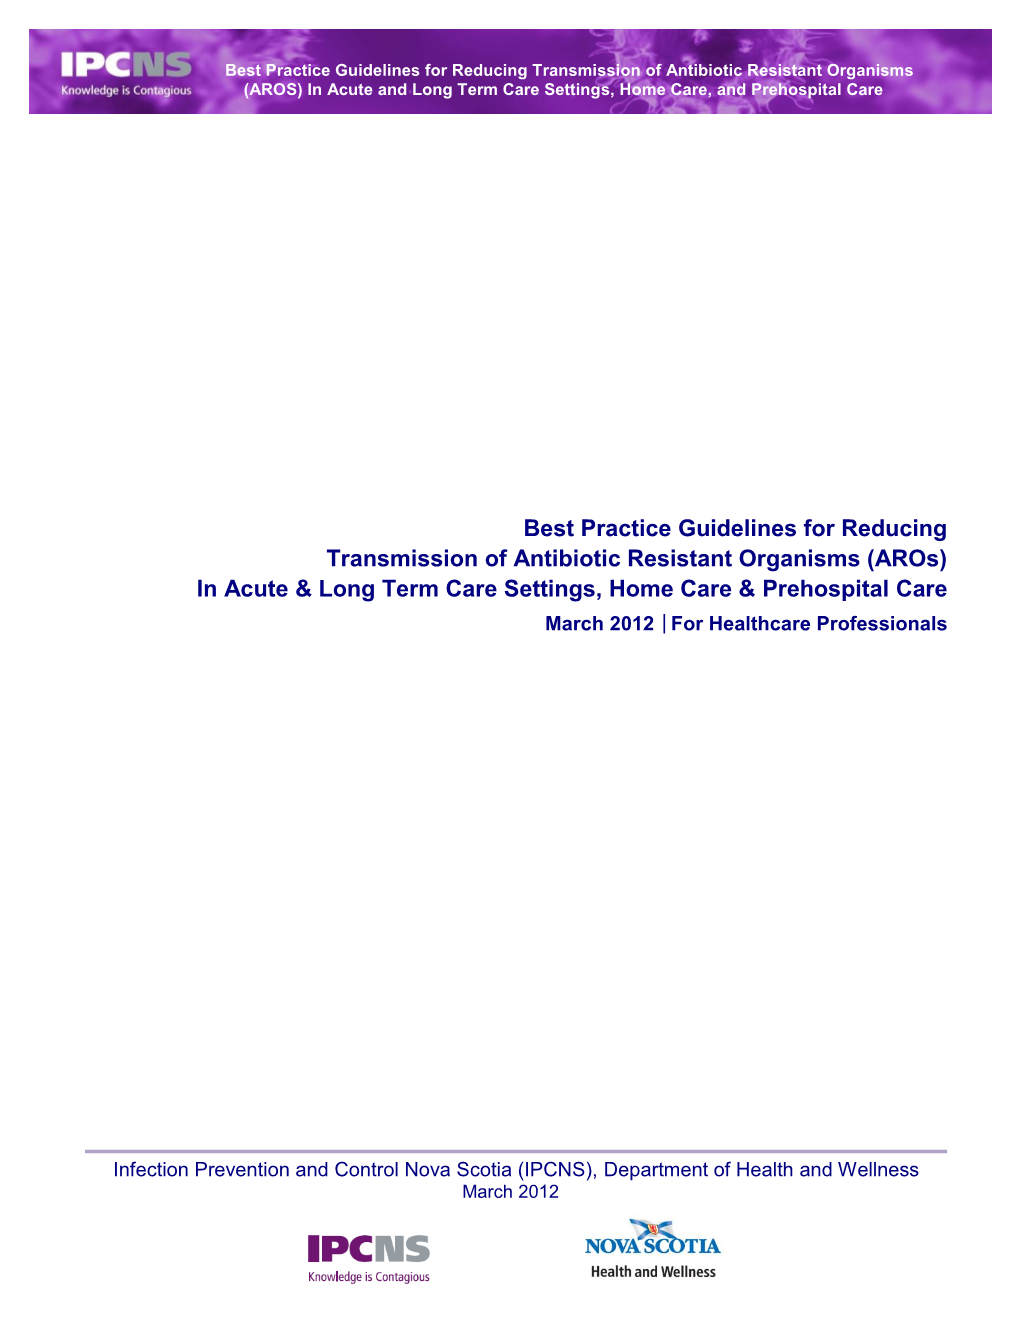 MRSA and VRE Best Practices Document